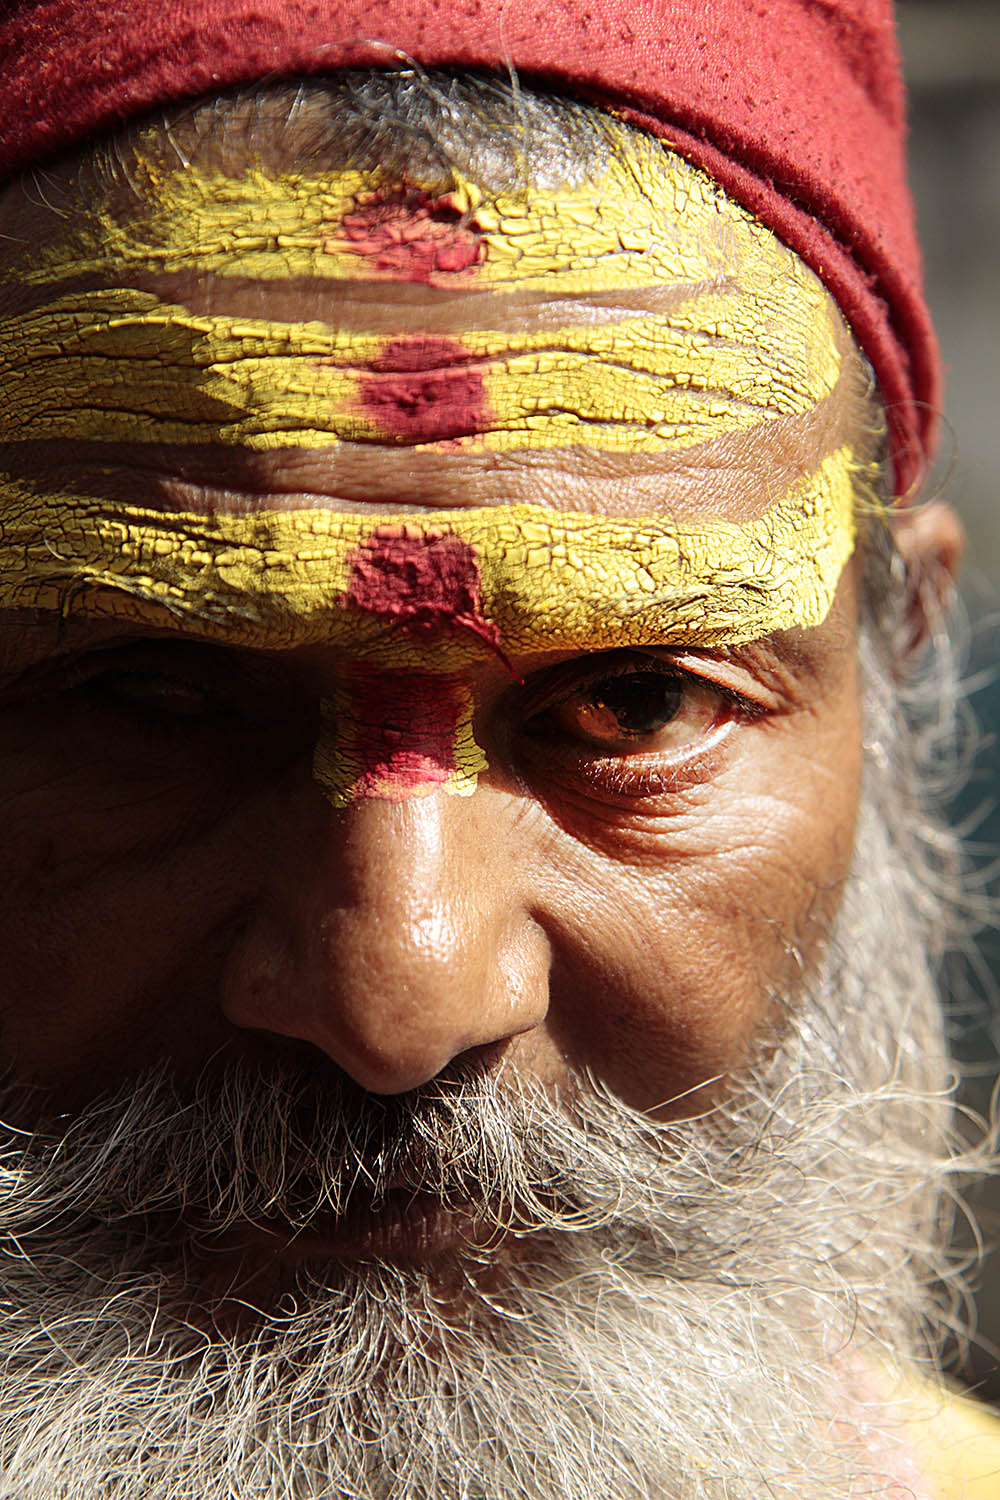  This  sādhu , or holy man, places  tikka , a red spot on the forehead, on people in Kathmandu, Nepal.  Sādhu  live on the edge of society after renouncing material goods.&nbsp; 